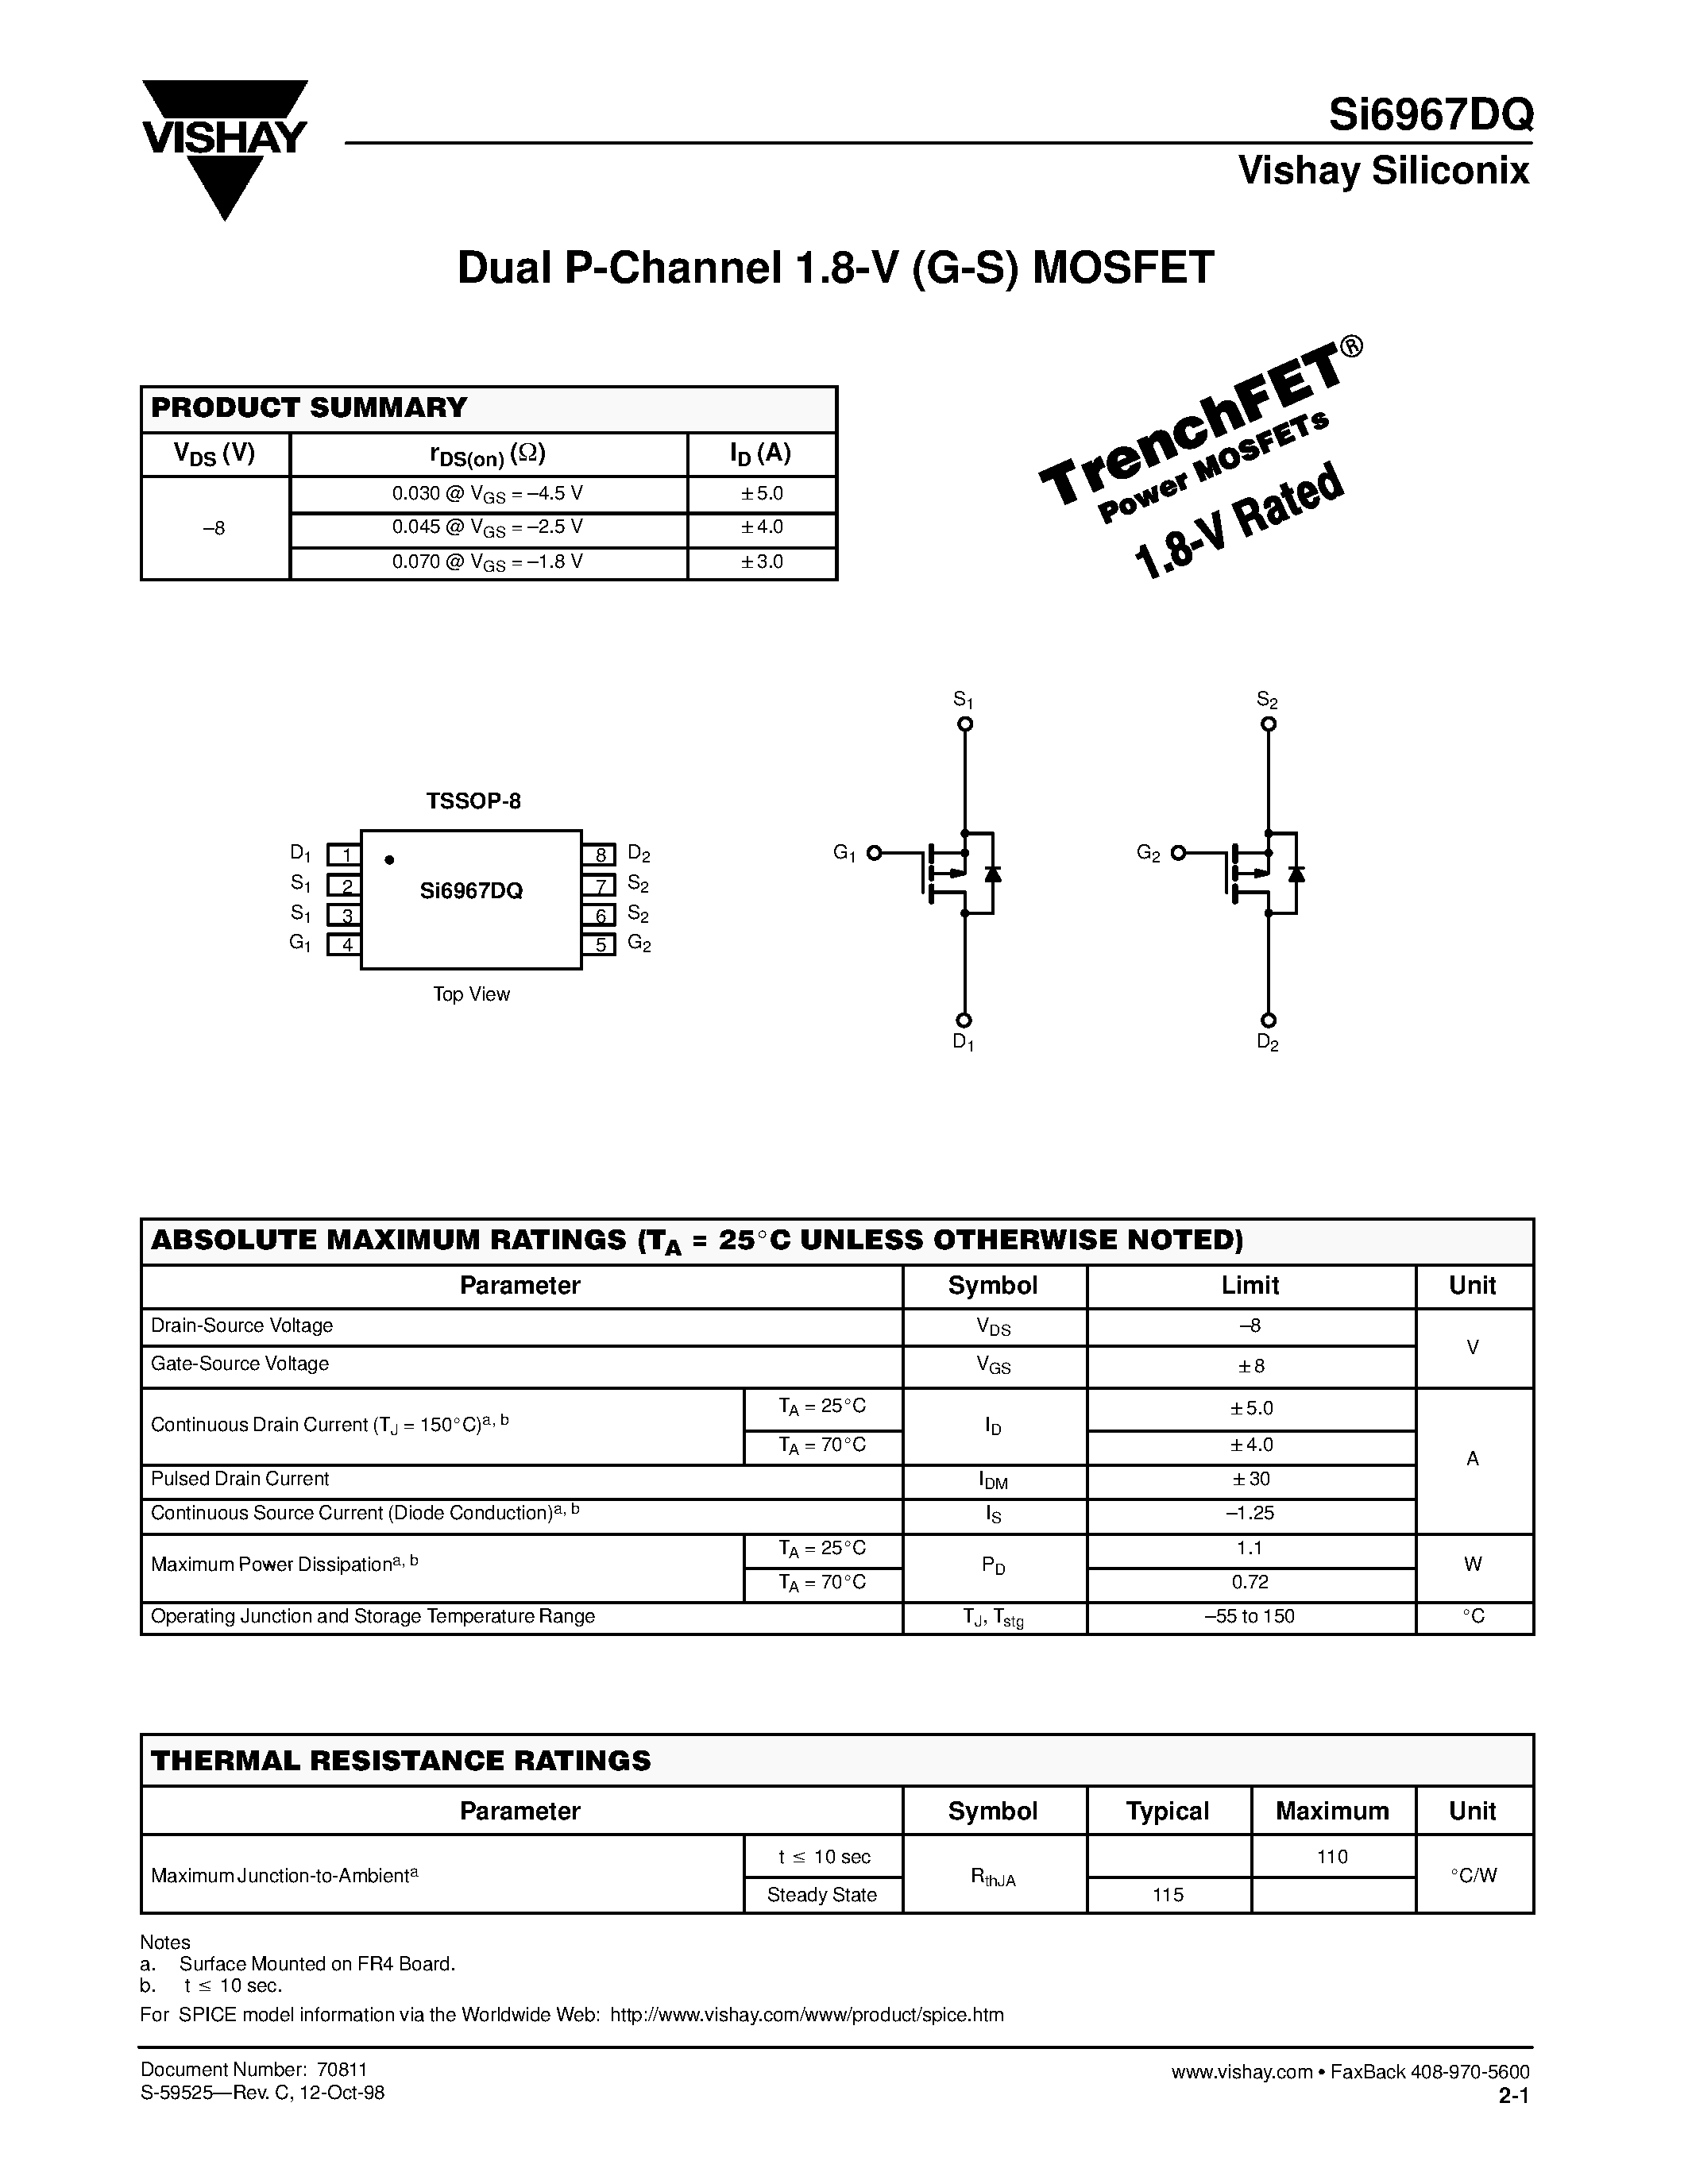 Datasheet SI6967DQ - Dual P-Channel 1.8-V (G-S) MOSFET page 1